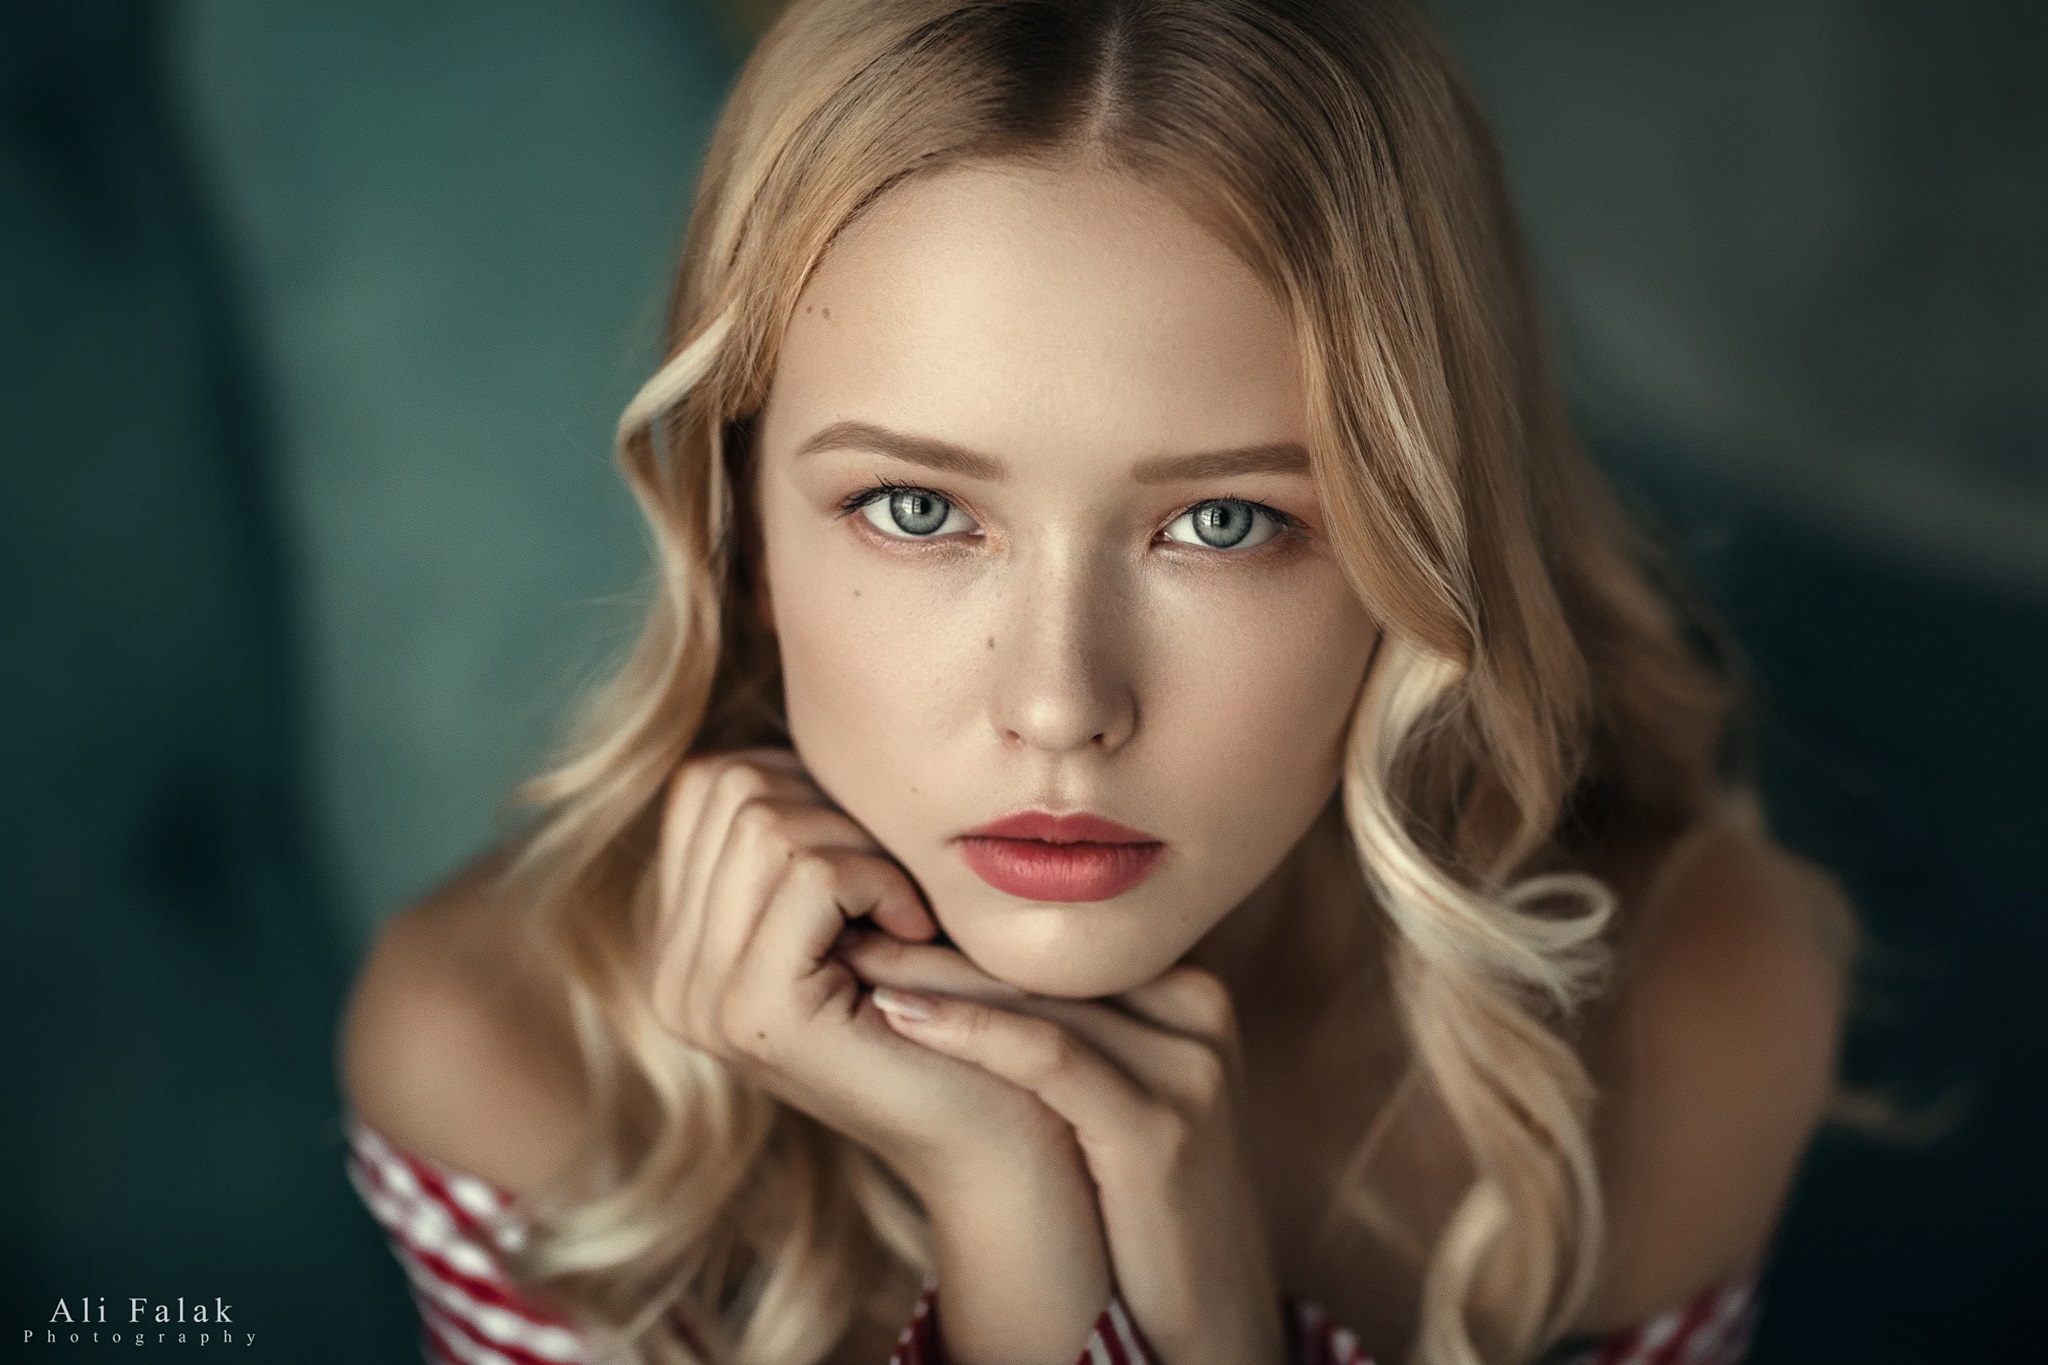 Women Model Blonde Long Hair Face Looking At Viewer Gray Eyes Pink Lipstick Touching Face Depth Of F 2048x1365